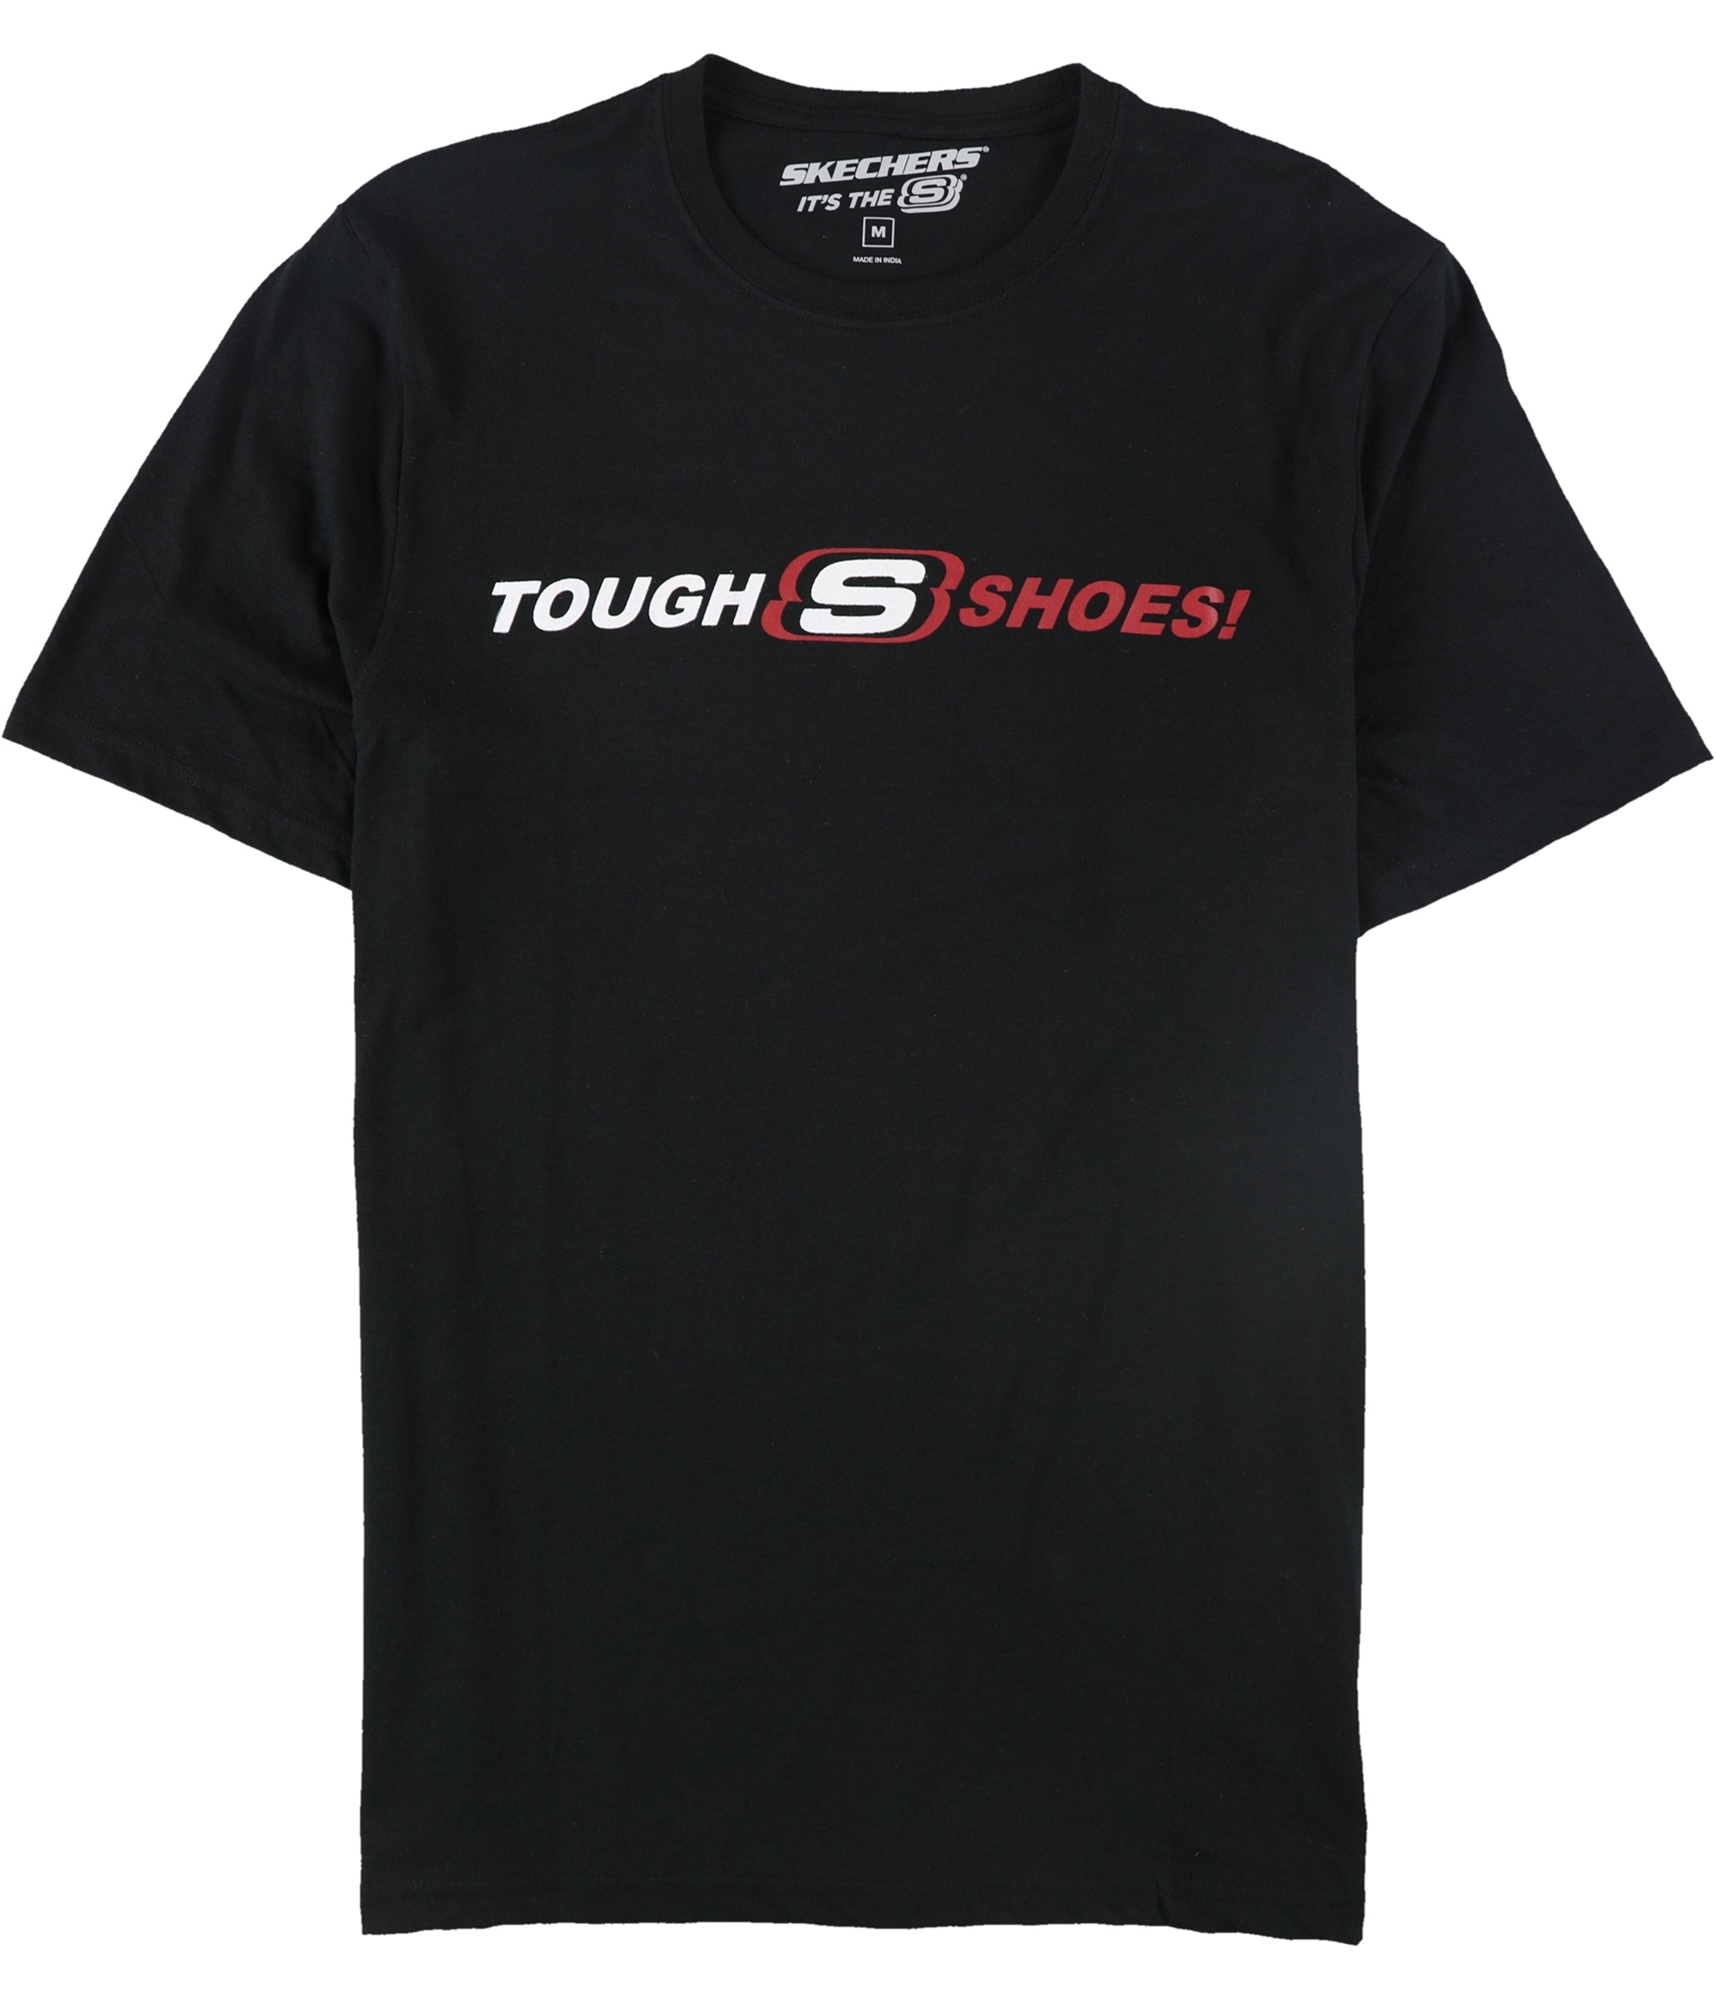 Buy a Skechers Mens Tough Shoes! Graphic T-Shirt | Tagsweekly